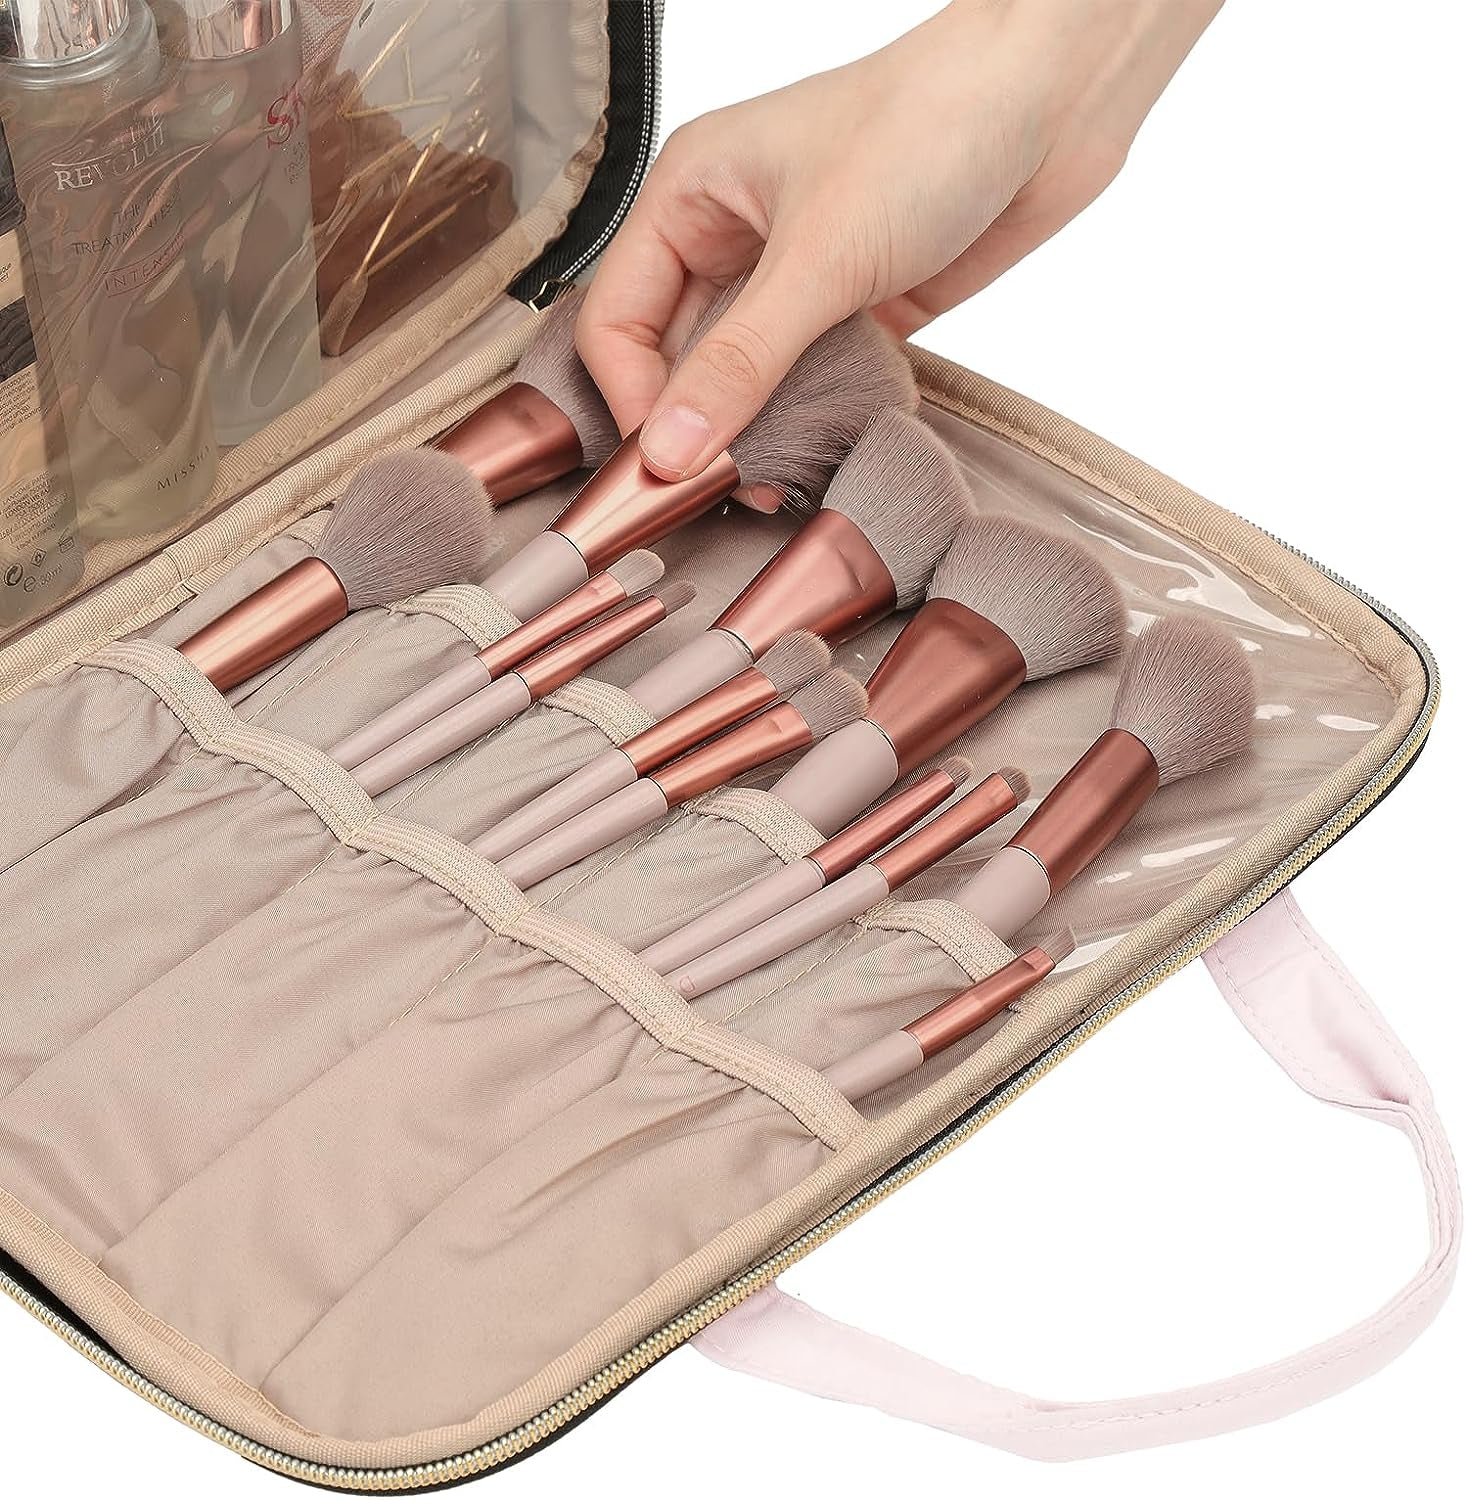 Portable Travel Makeup Bag: Professional Cosmetic Organizer for Travel-Sized Toiletries in Pink